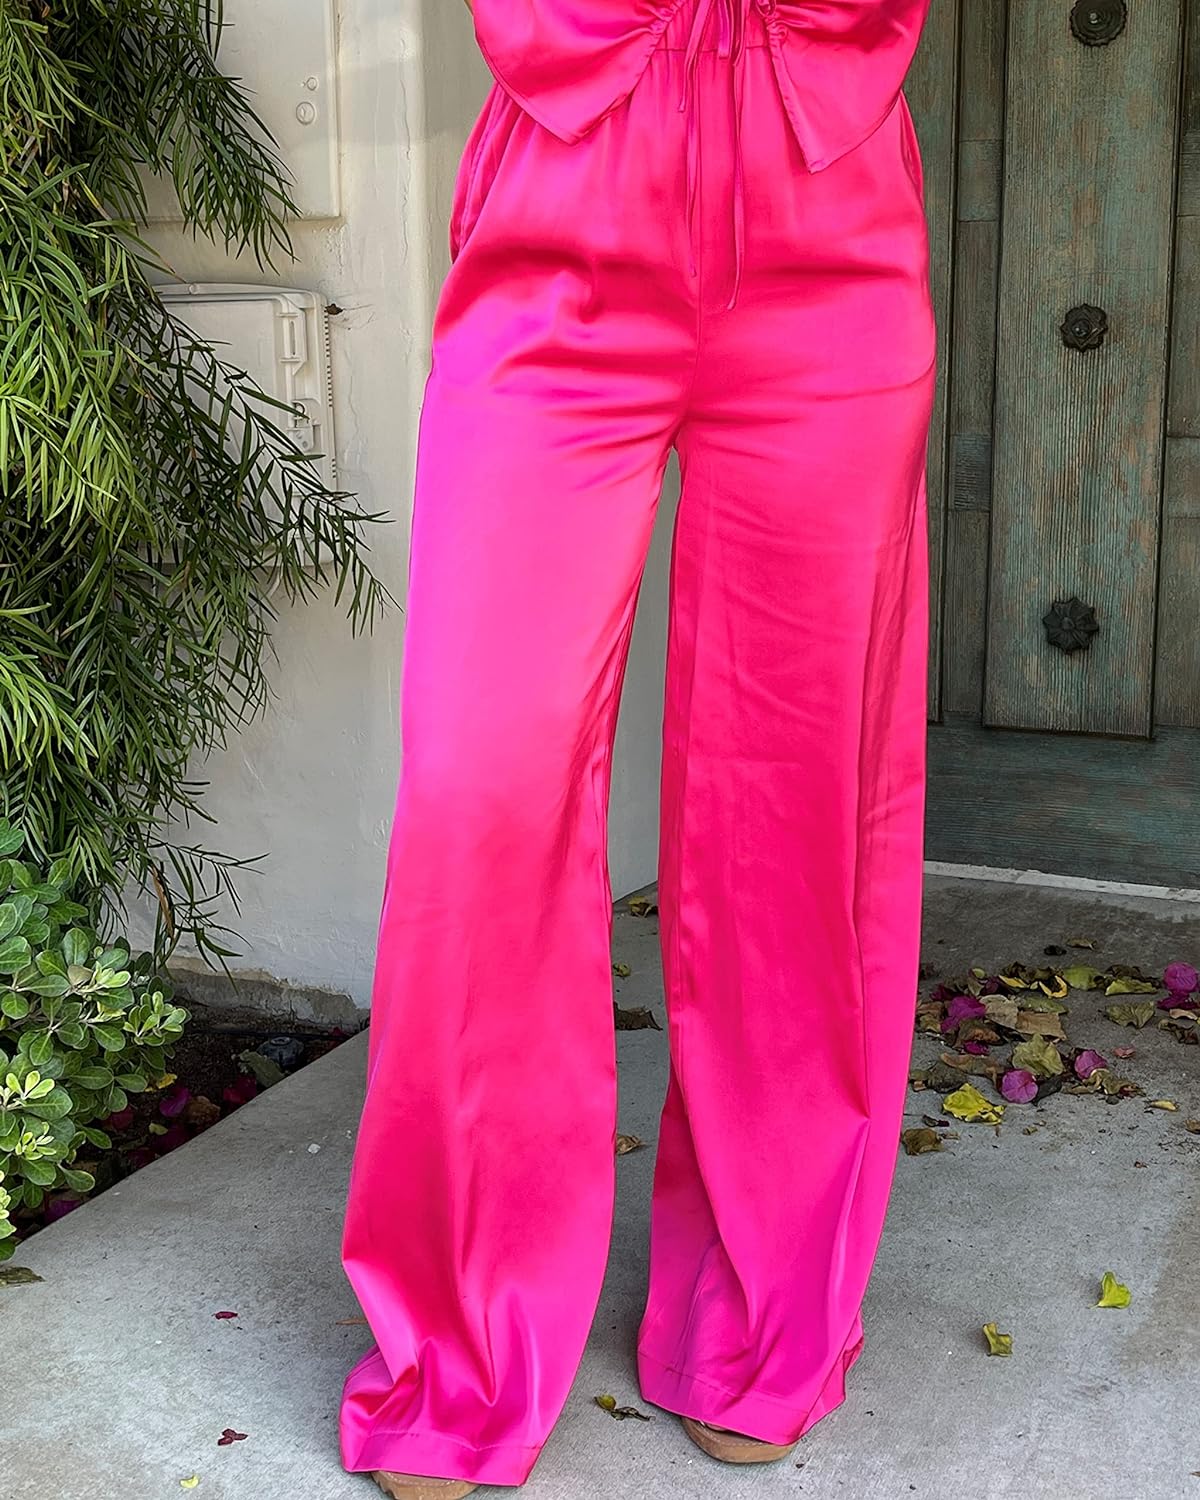 The Drop Womens Hot Pink Wide Leg Pull-on Pant by @karsenkimball